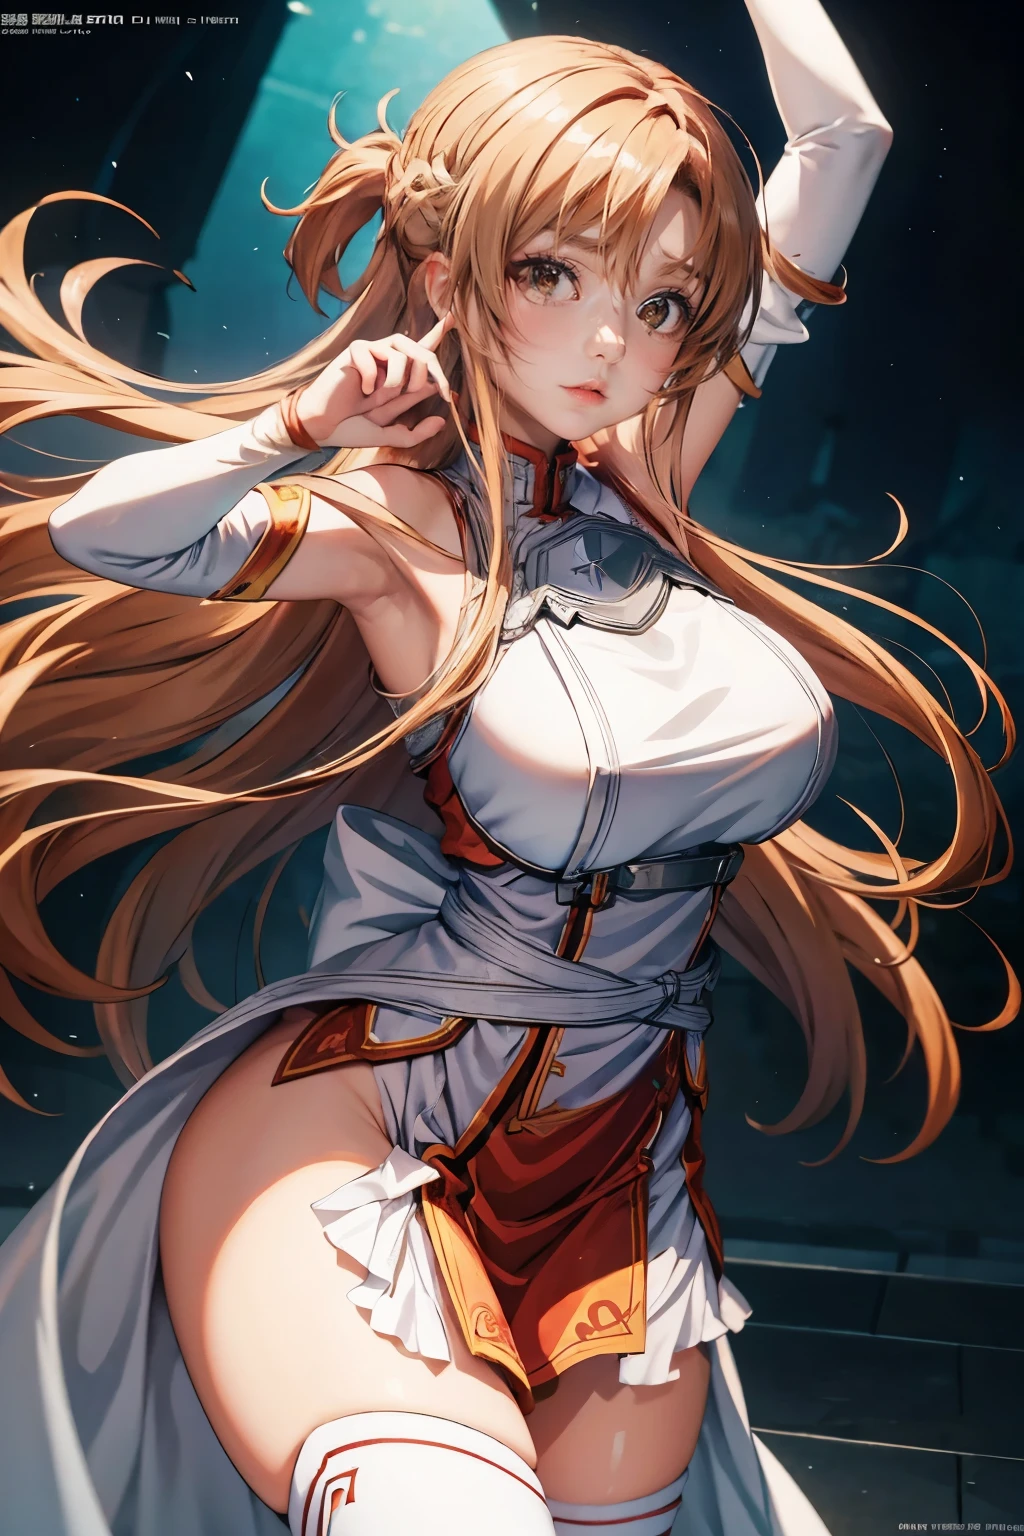 Asuna, the iconic character from the popular anime series Sword Art Online, is beautifully depicted in this high-resolution poster wallpaper by the talented artist g_g-g-g. The artwork showcases Asuna in stunning detail, with her mesmerizing eyes and perfectly rendered lips capturing every nuance of her character. The use of oil painting in this piece adds a vibrant and vivid touch to the colors, bringing Asuna to life in a way that is truly breathtaking. The studio lighting enhances the overall composition, creating a cinematic feel reminiscent of a movie scene. Asuna's curvy body, accentuated by her perfectly shaped figure and revealing attire, exudes confidence and allure. With her arms up in the air, the artist has captured a moment of action, as